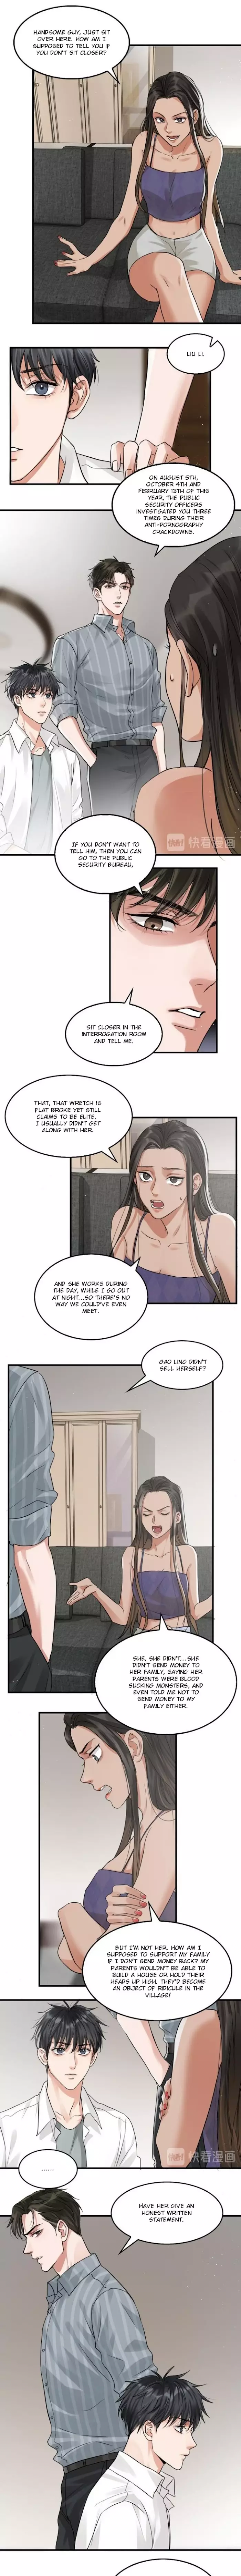 Breaking Through The Clouds 2: Swallow The Sea - 31 page 4-2b856bd0